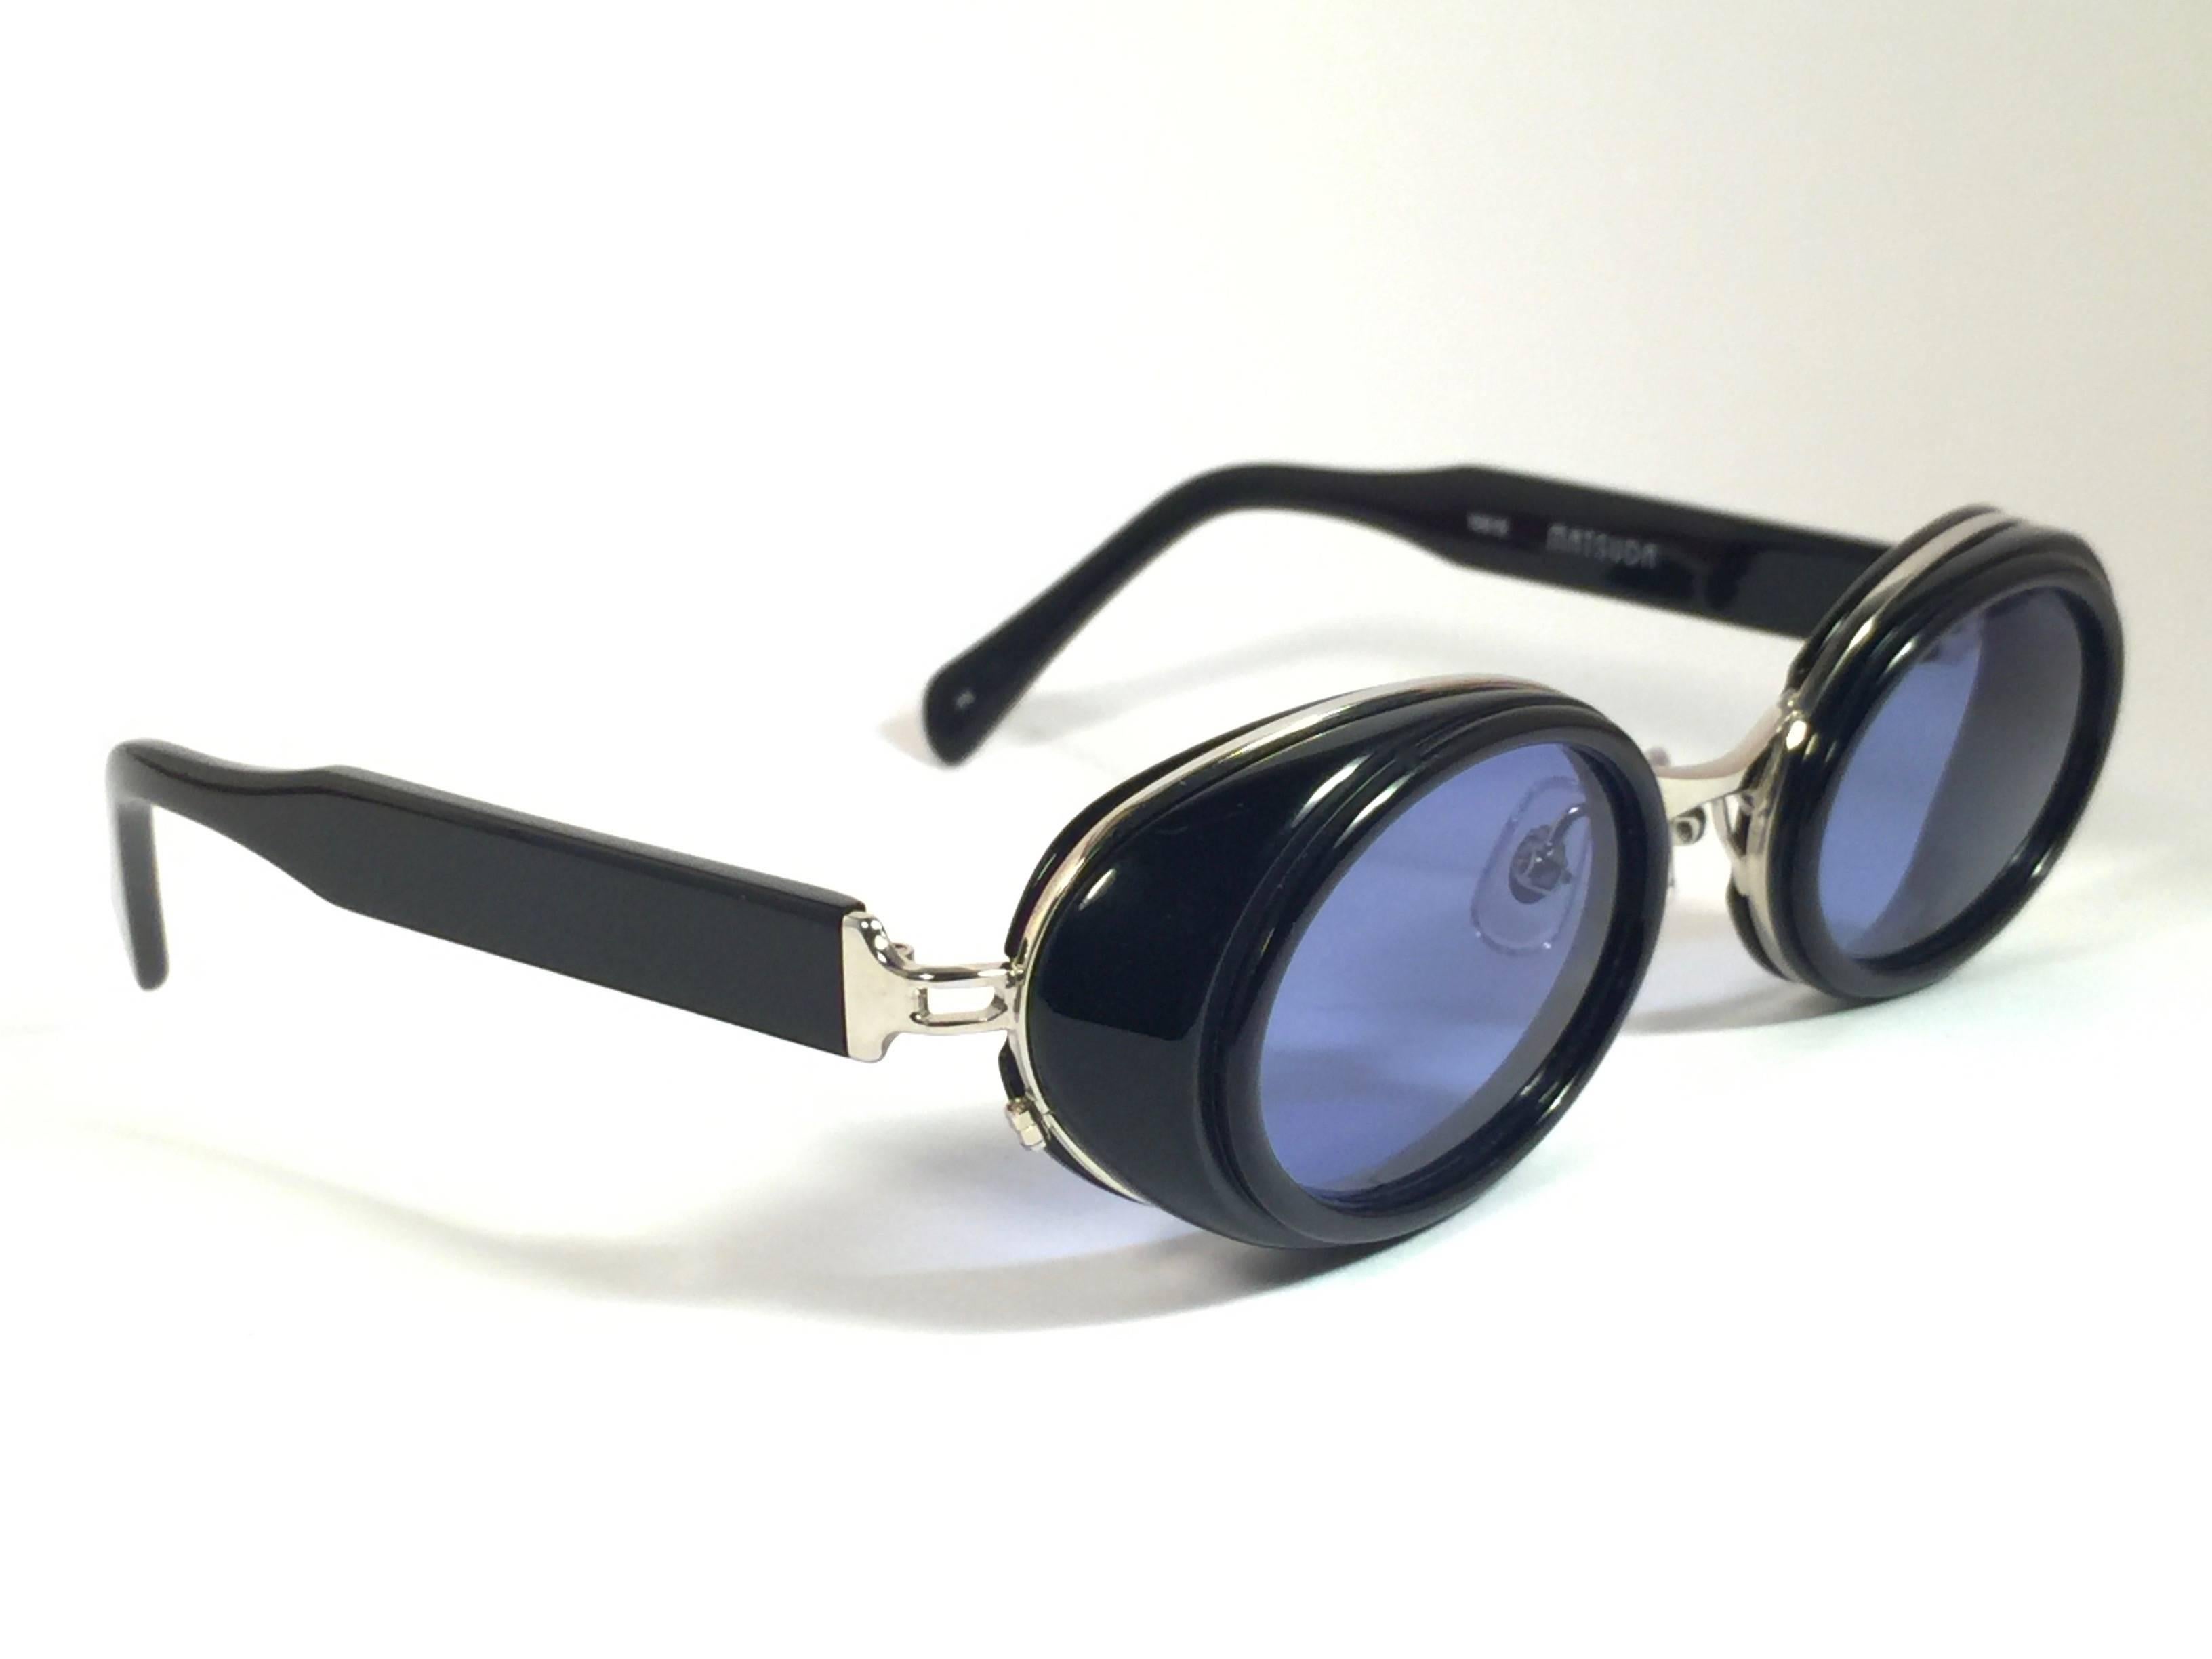 Cult brand Matsuda signed this ultra chic pair of dark blue with silver accents sunglasses. 

Spotless medium blue lenses.

Superior quality and design. 

New, never worn or displayed. Made in japan.
